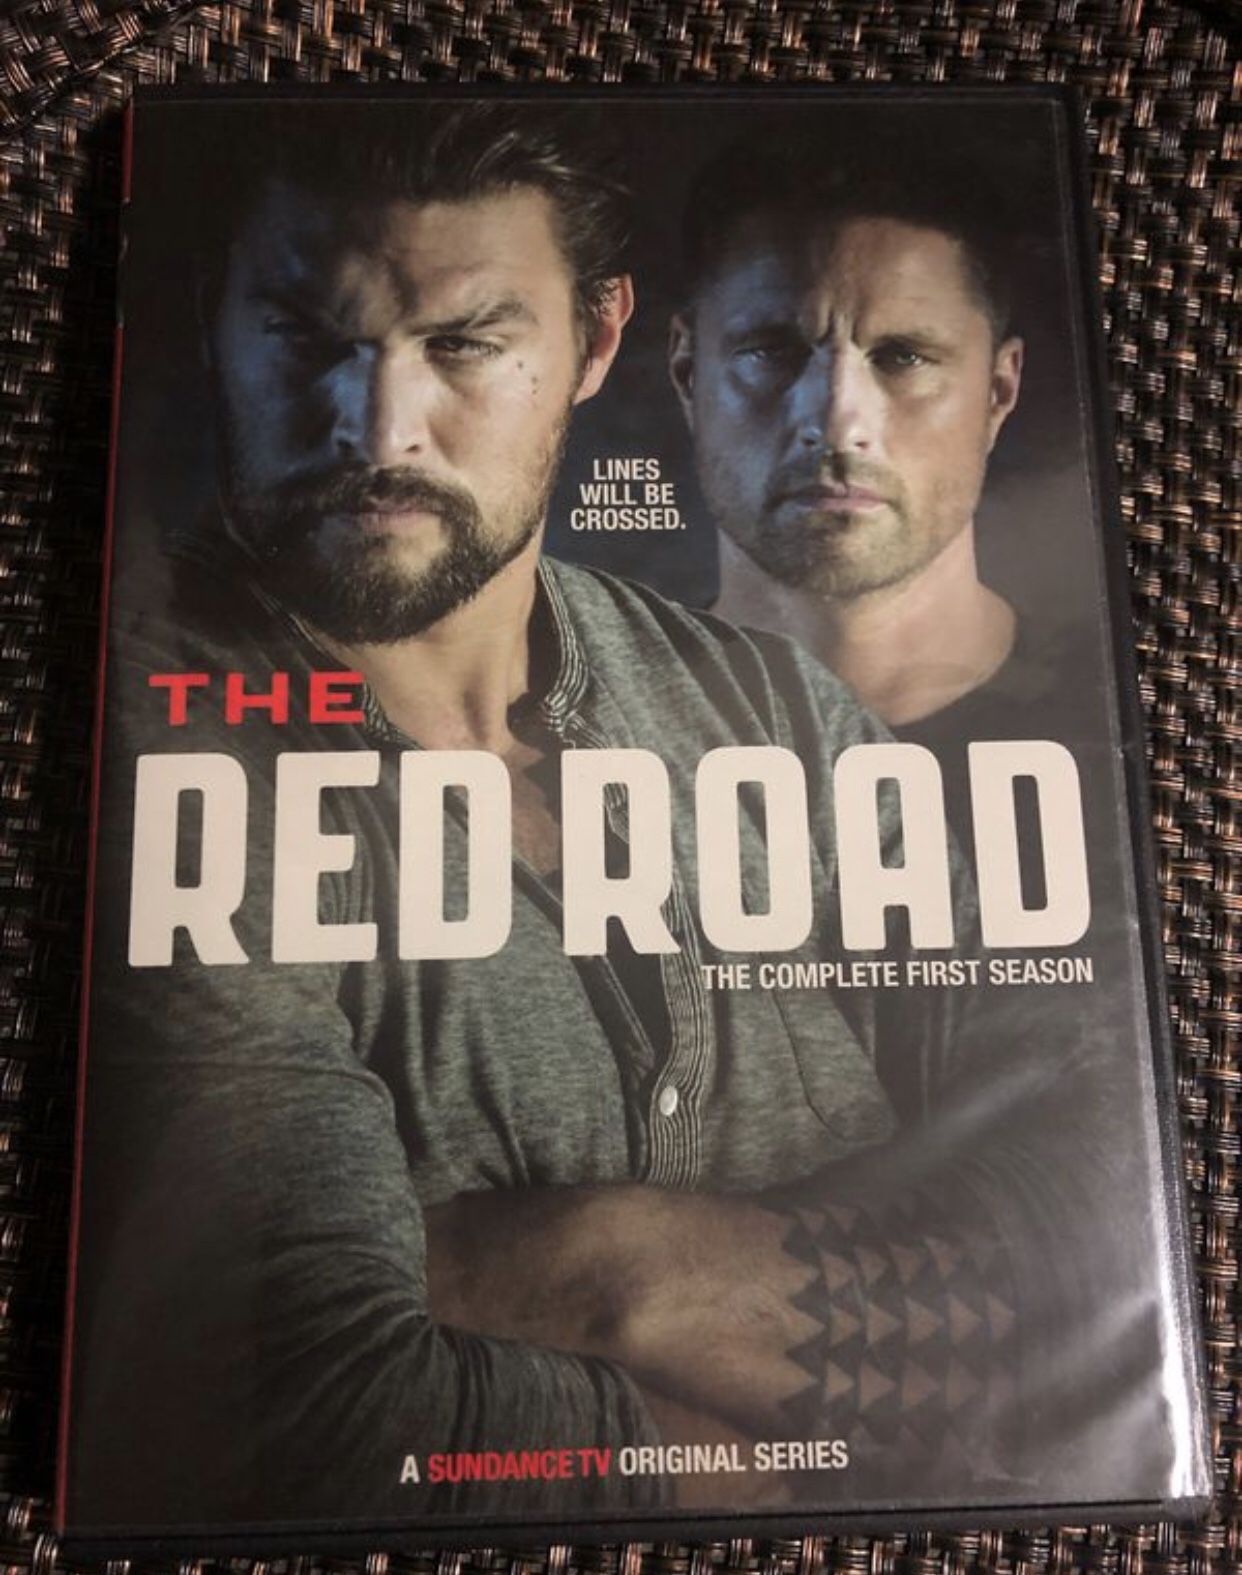 Dvd-serial- THE RED ROAD ( season first)...